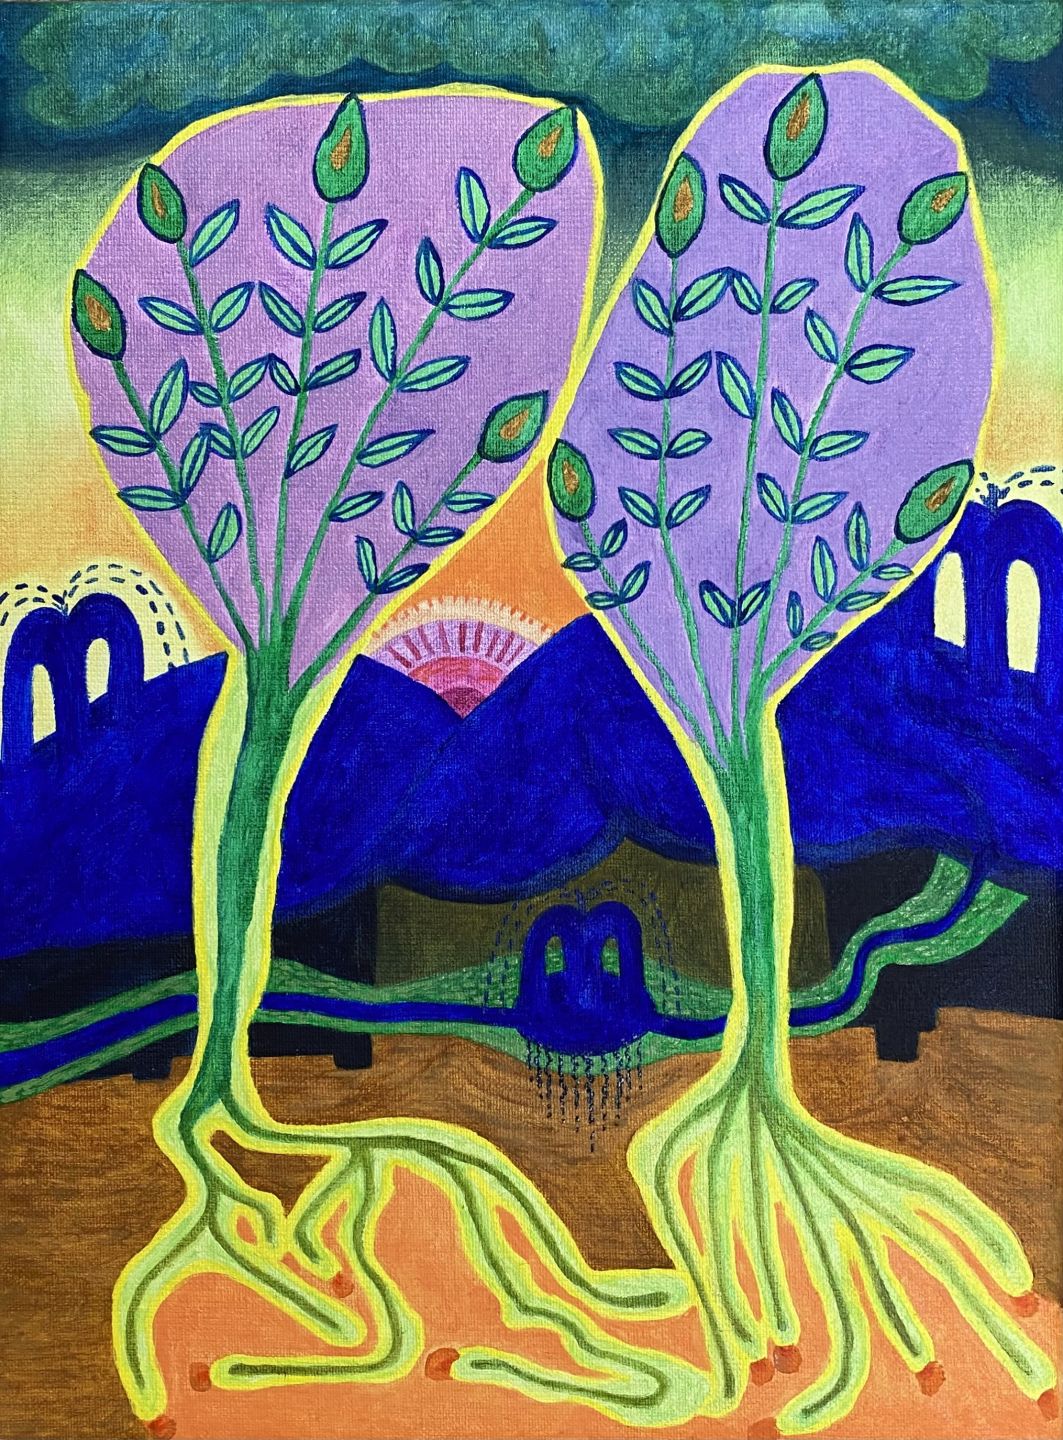 Two Trees and Three Springs“ (2022): Oil on canvas, 30 x 40 cm